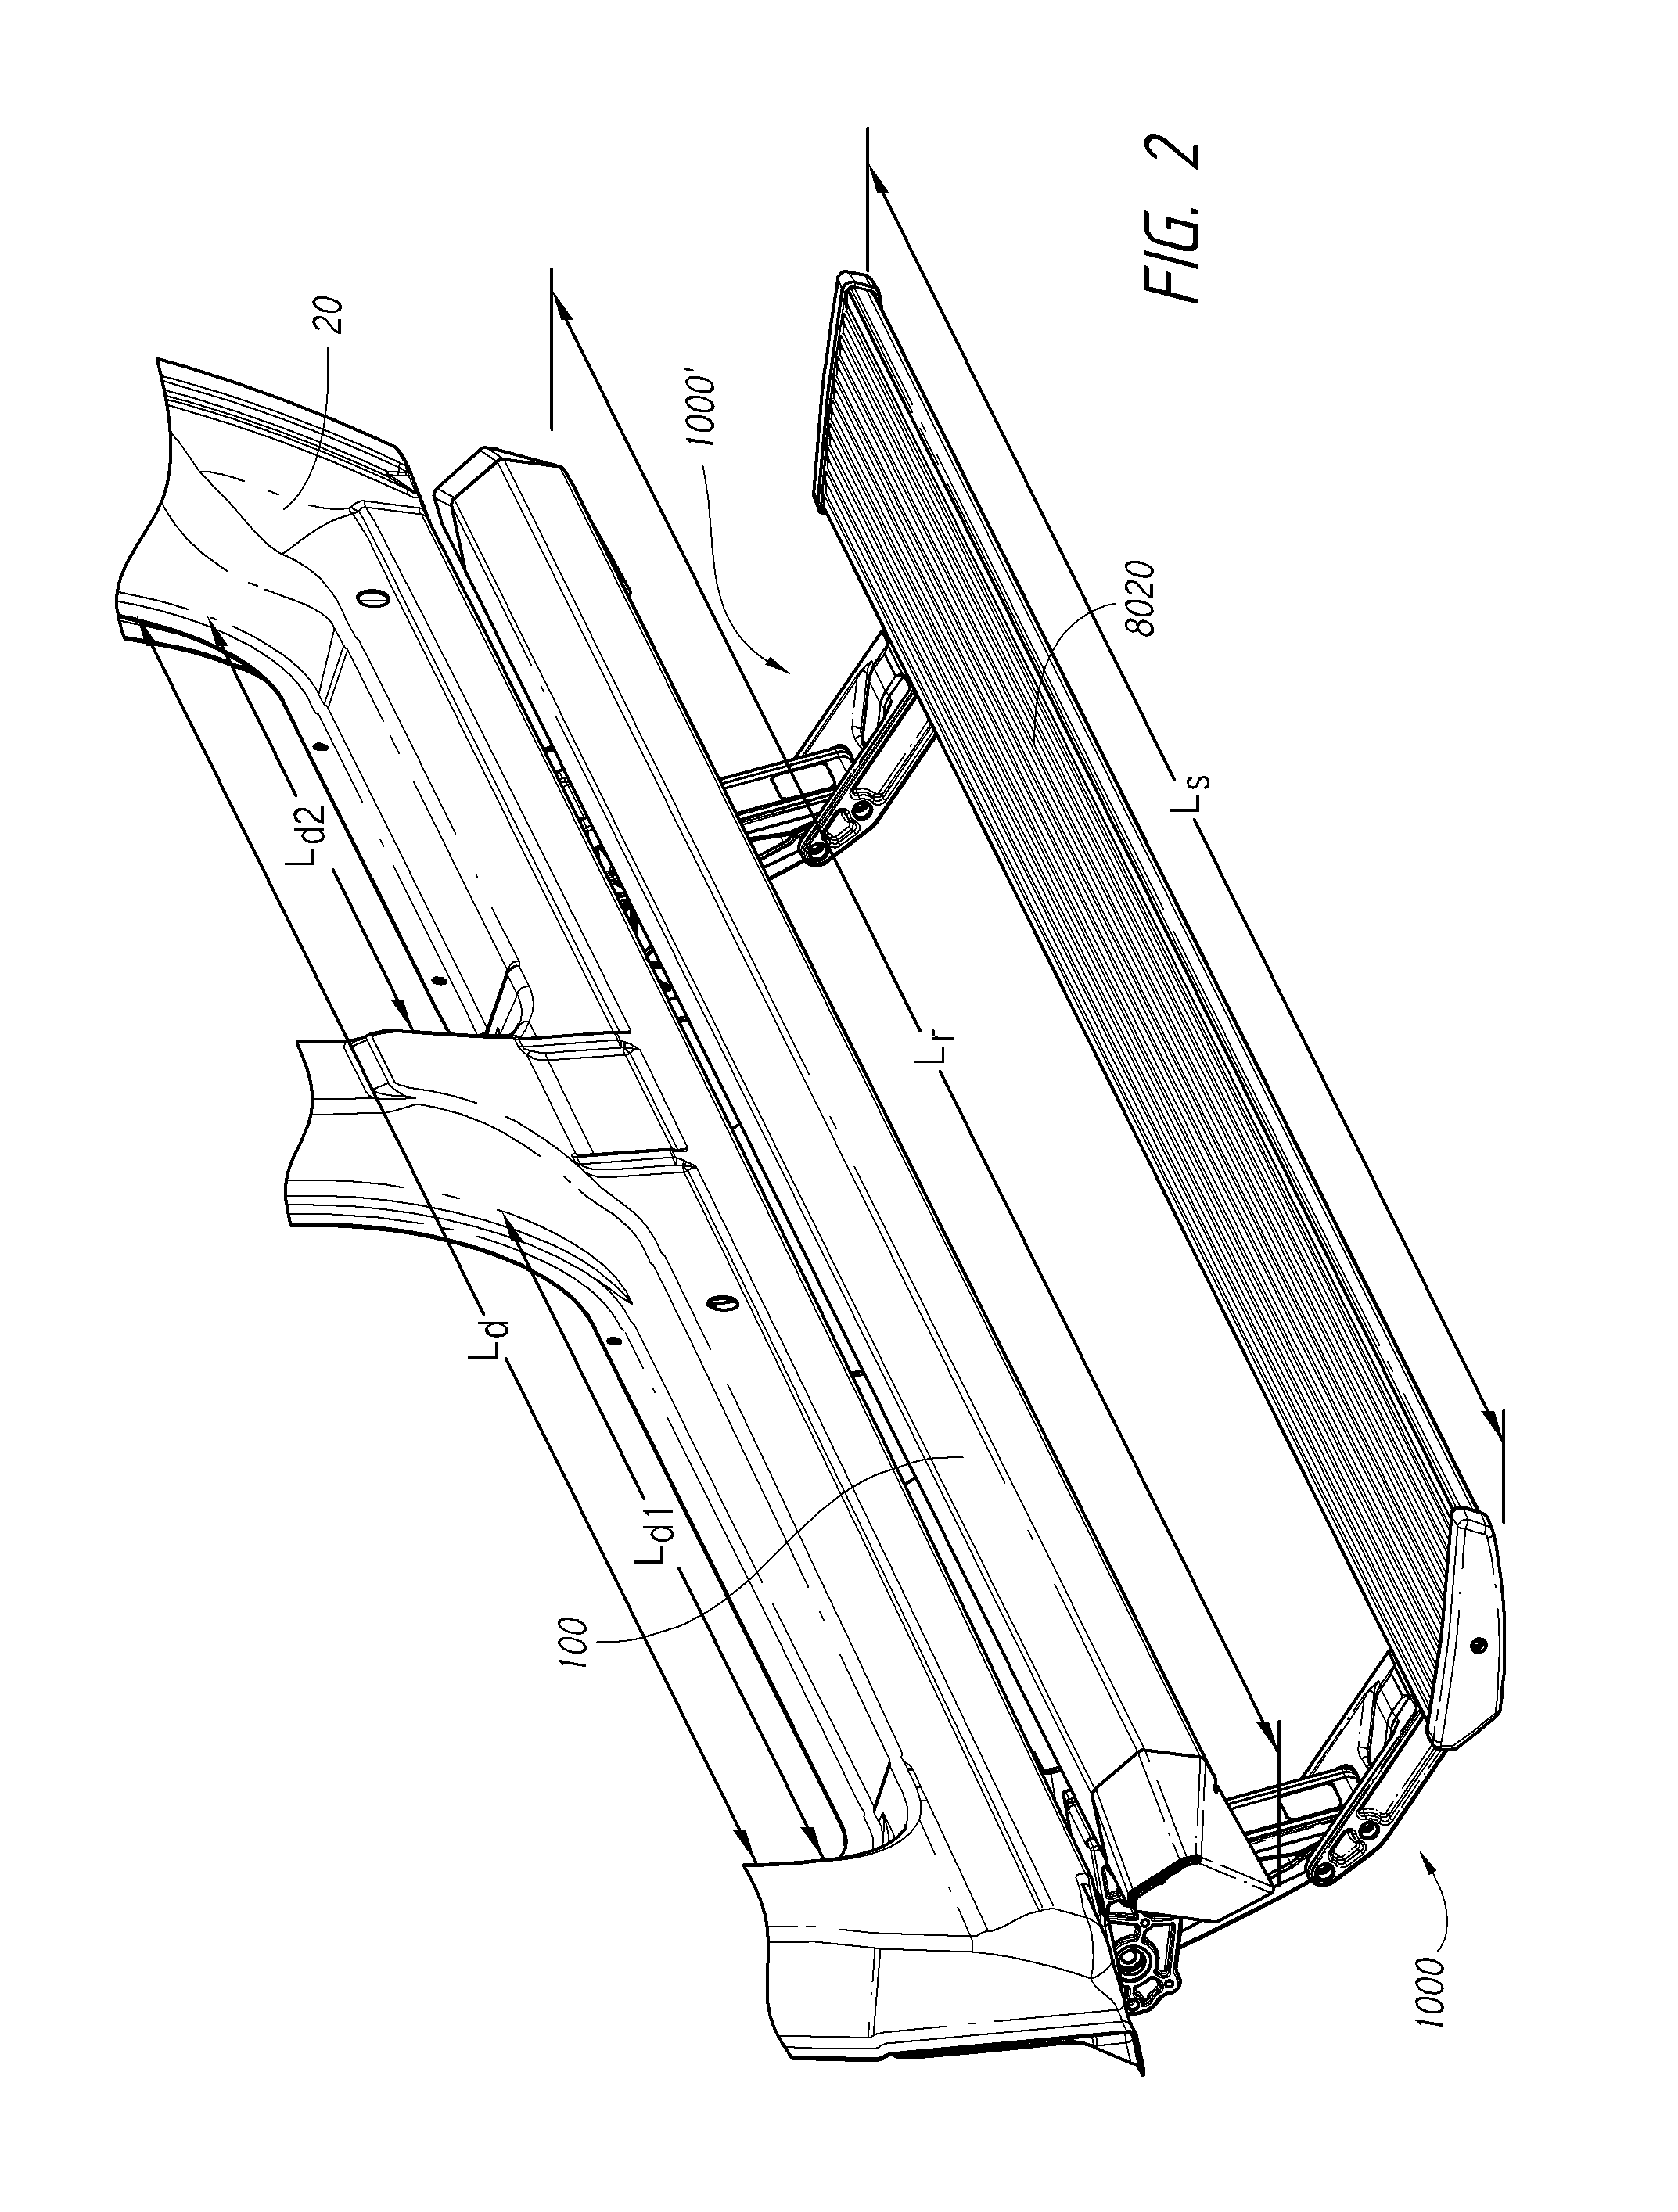 Retractable step and side bar assembly for raised vehicle